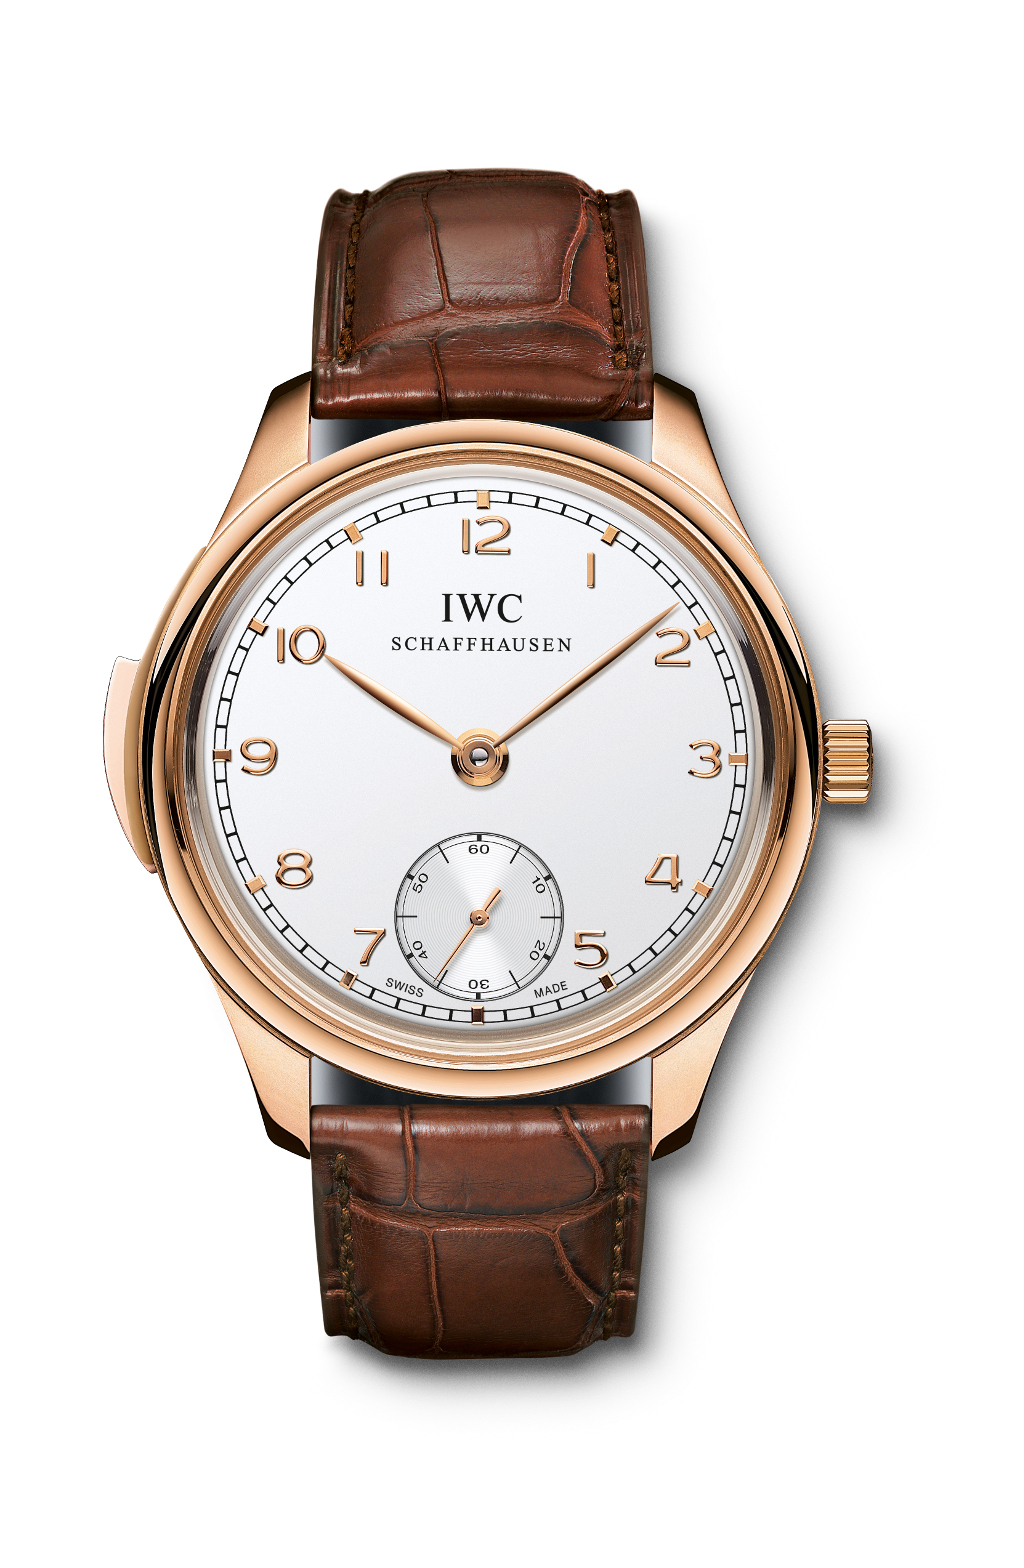 The IWC Portugieser Minute Repeater, in Red Gold.